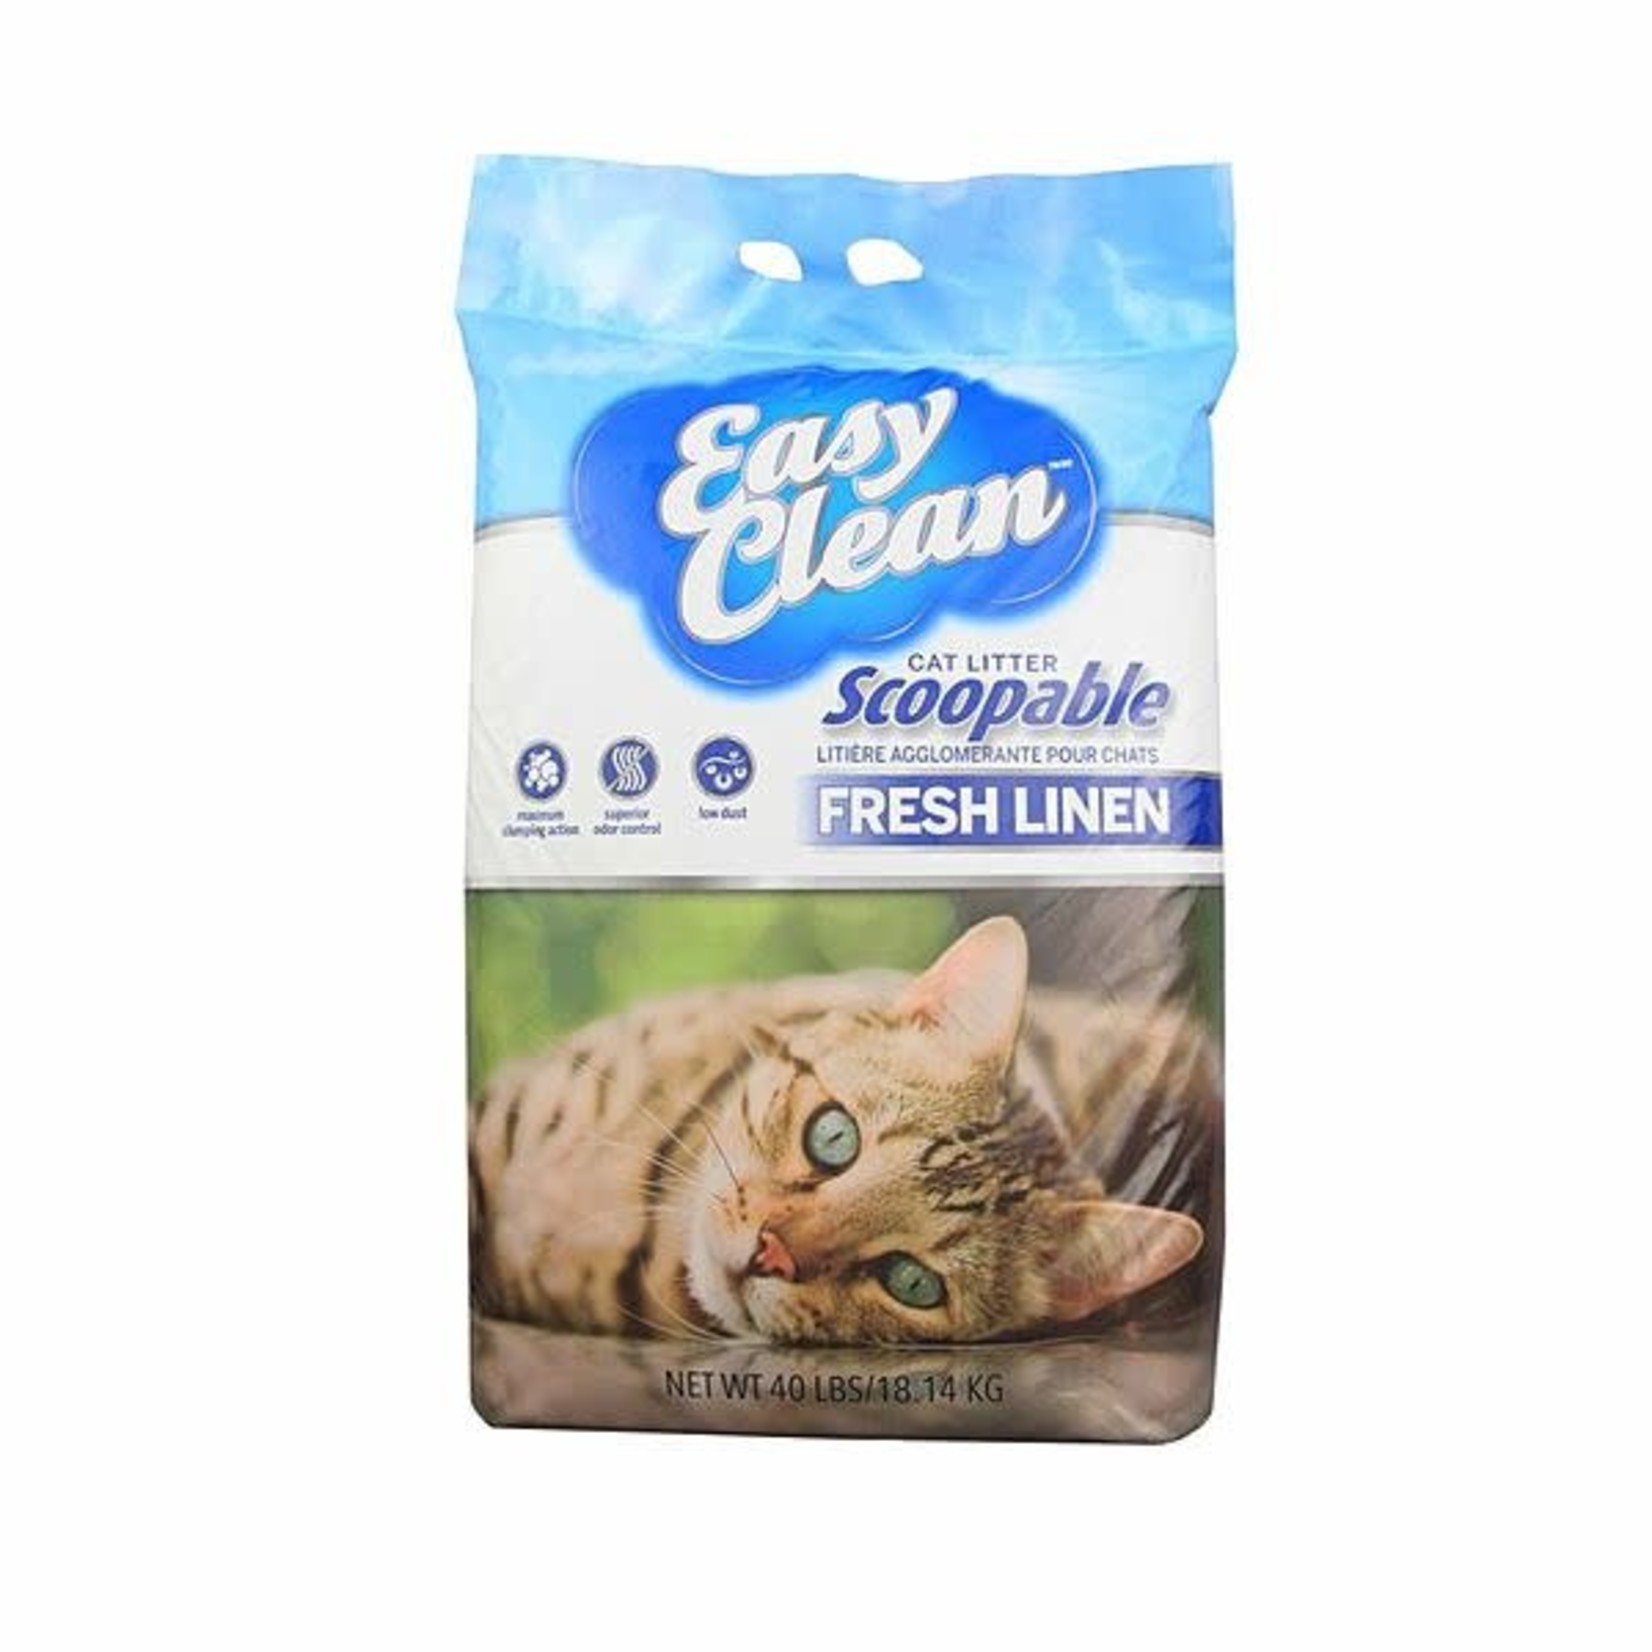 Easy Clean Easy Clean Clumping Cat Litter Fresh Linen 40LB